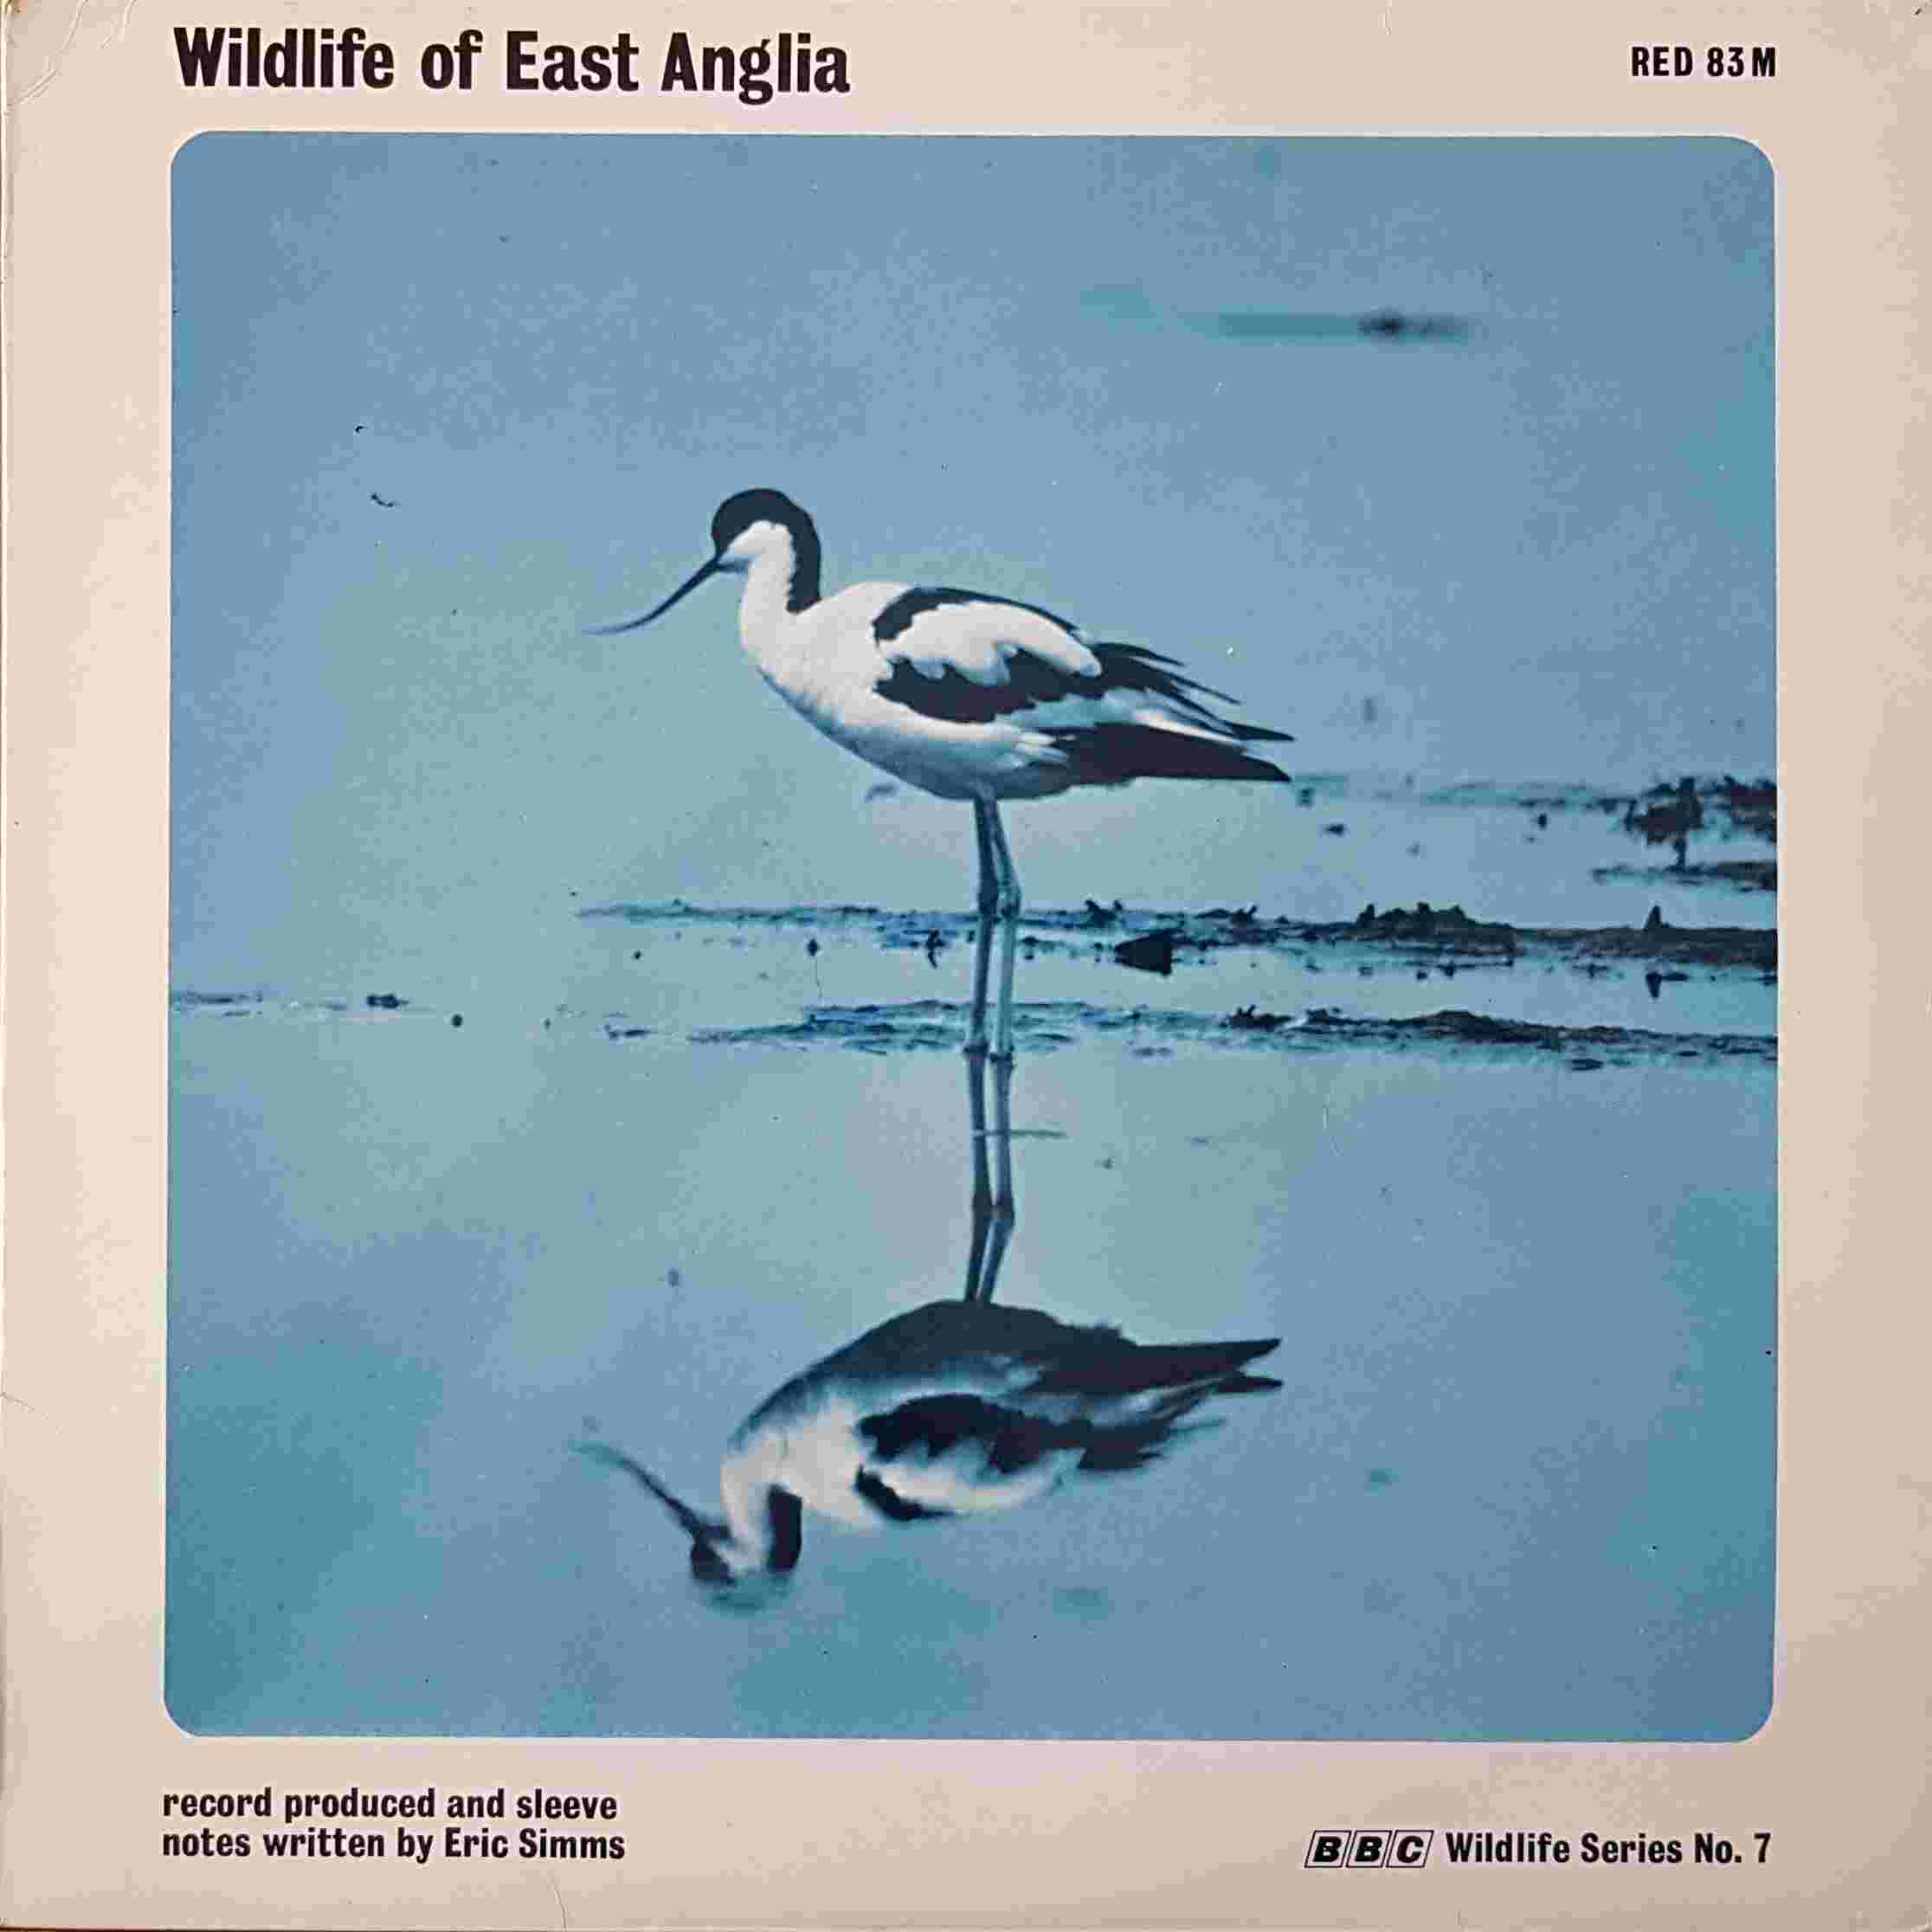 Picture of RED 83 Wildlife of East Anglia by artist Various from the BBC albums - Records and Tapes library